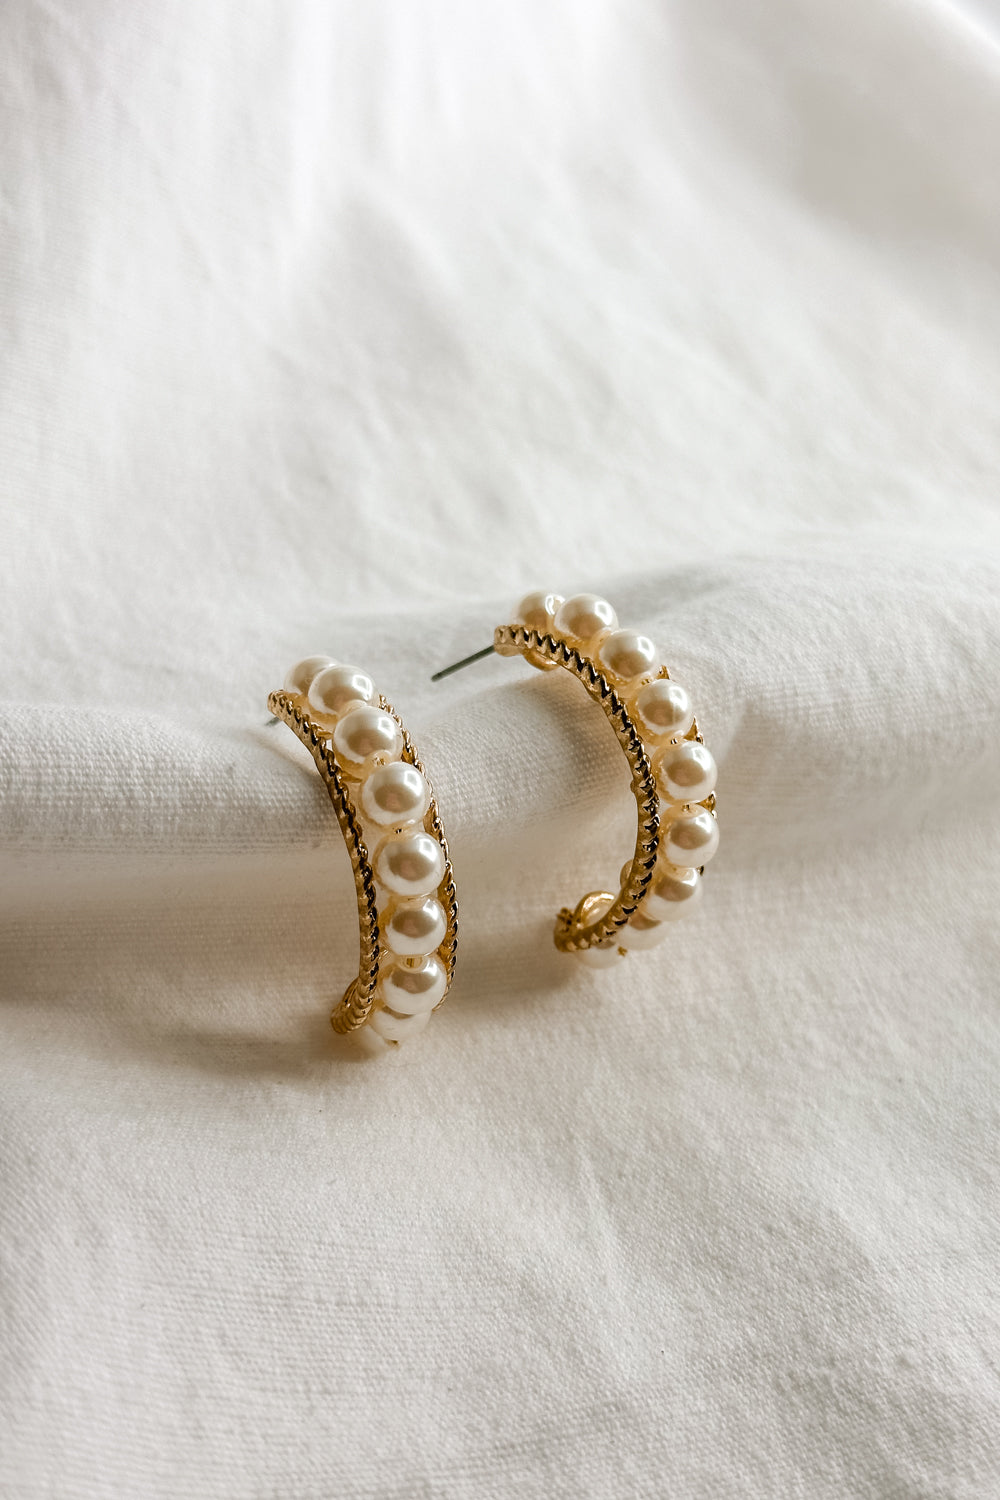 Flat lay view of the Elisa Gold Rope & Pearl Hoop Earring which features gold rope hoops with pearls